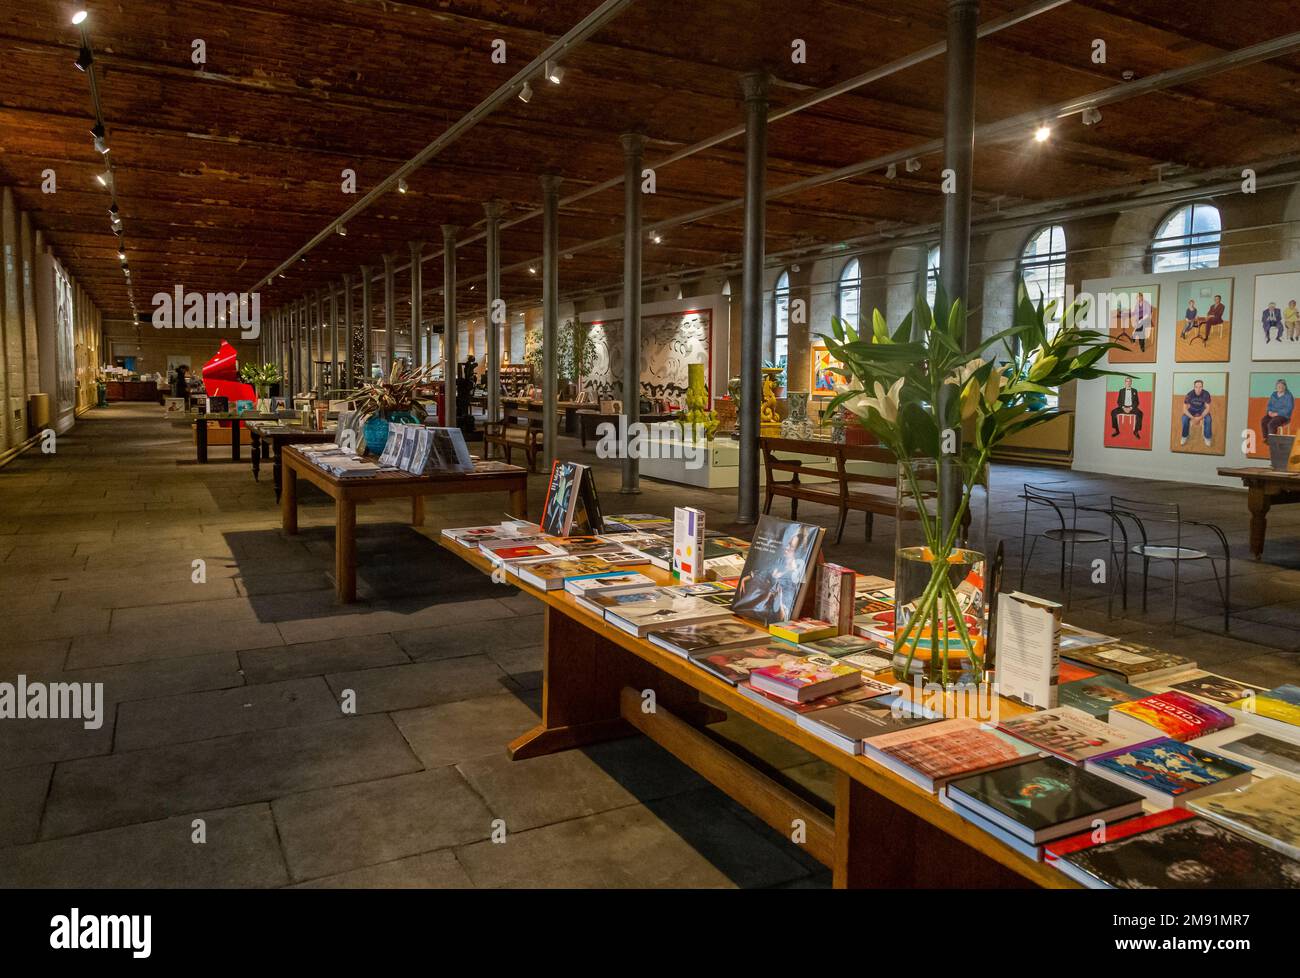 The interior of Salts Mill in Saltaire. Originally a textile mill, this is now an art gallery displaying the art work of David Hockney. Stock Photo